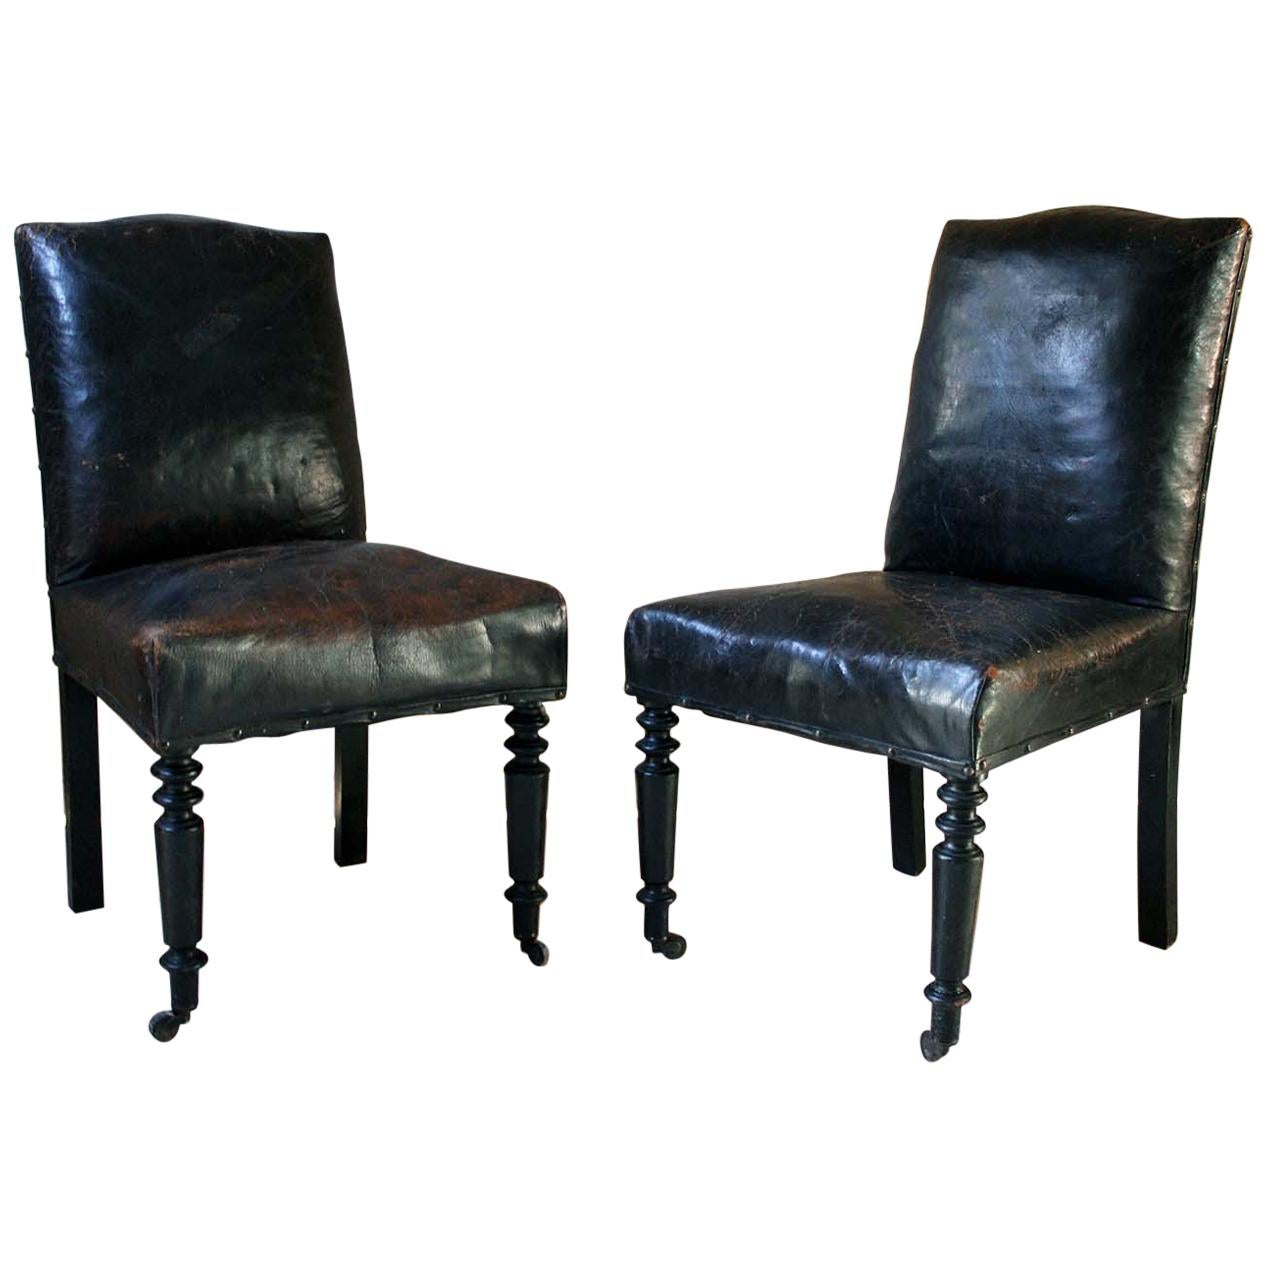 Pair of French Black Leather Upholstered and Ebonized Library Chairs, circa 1880